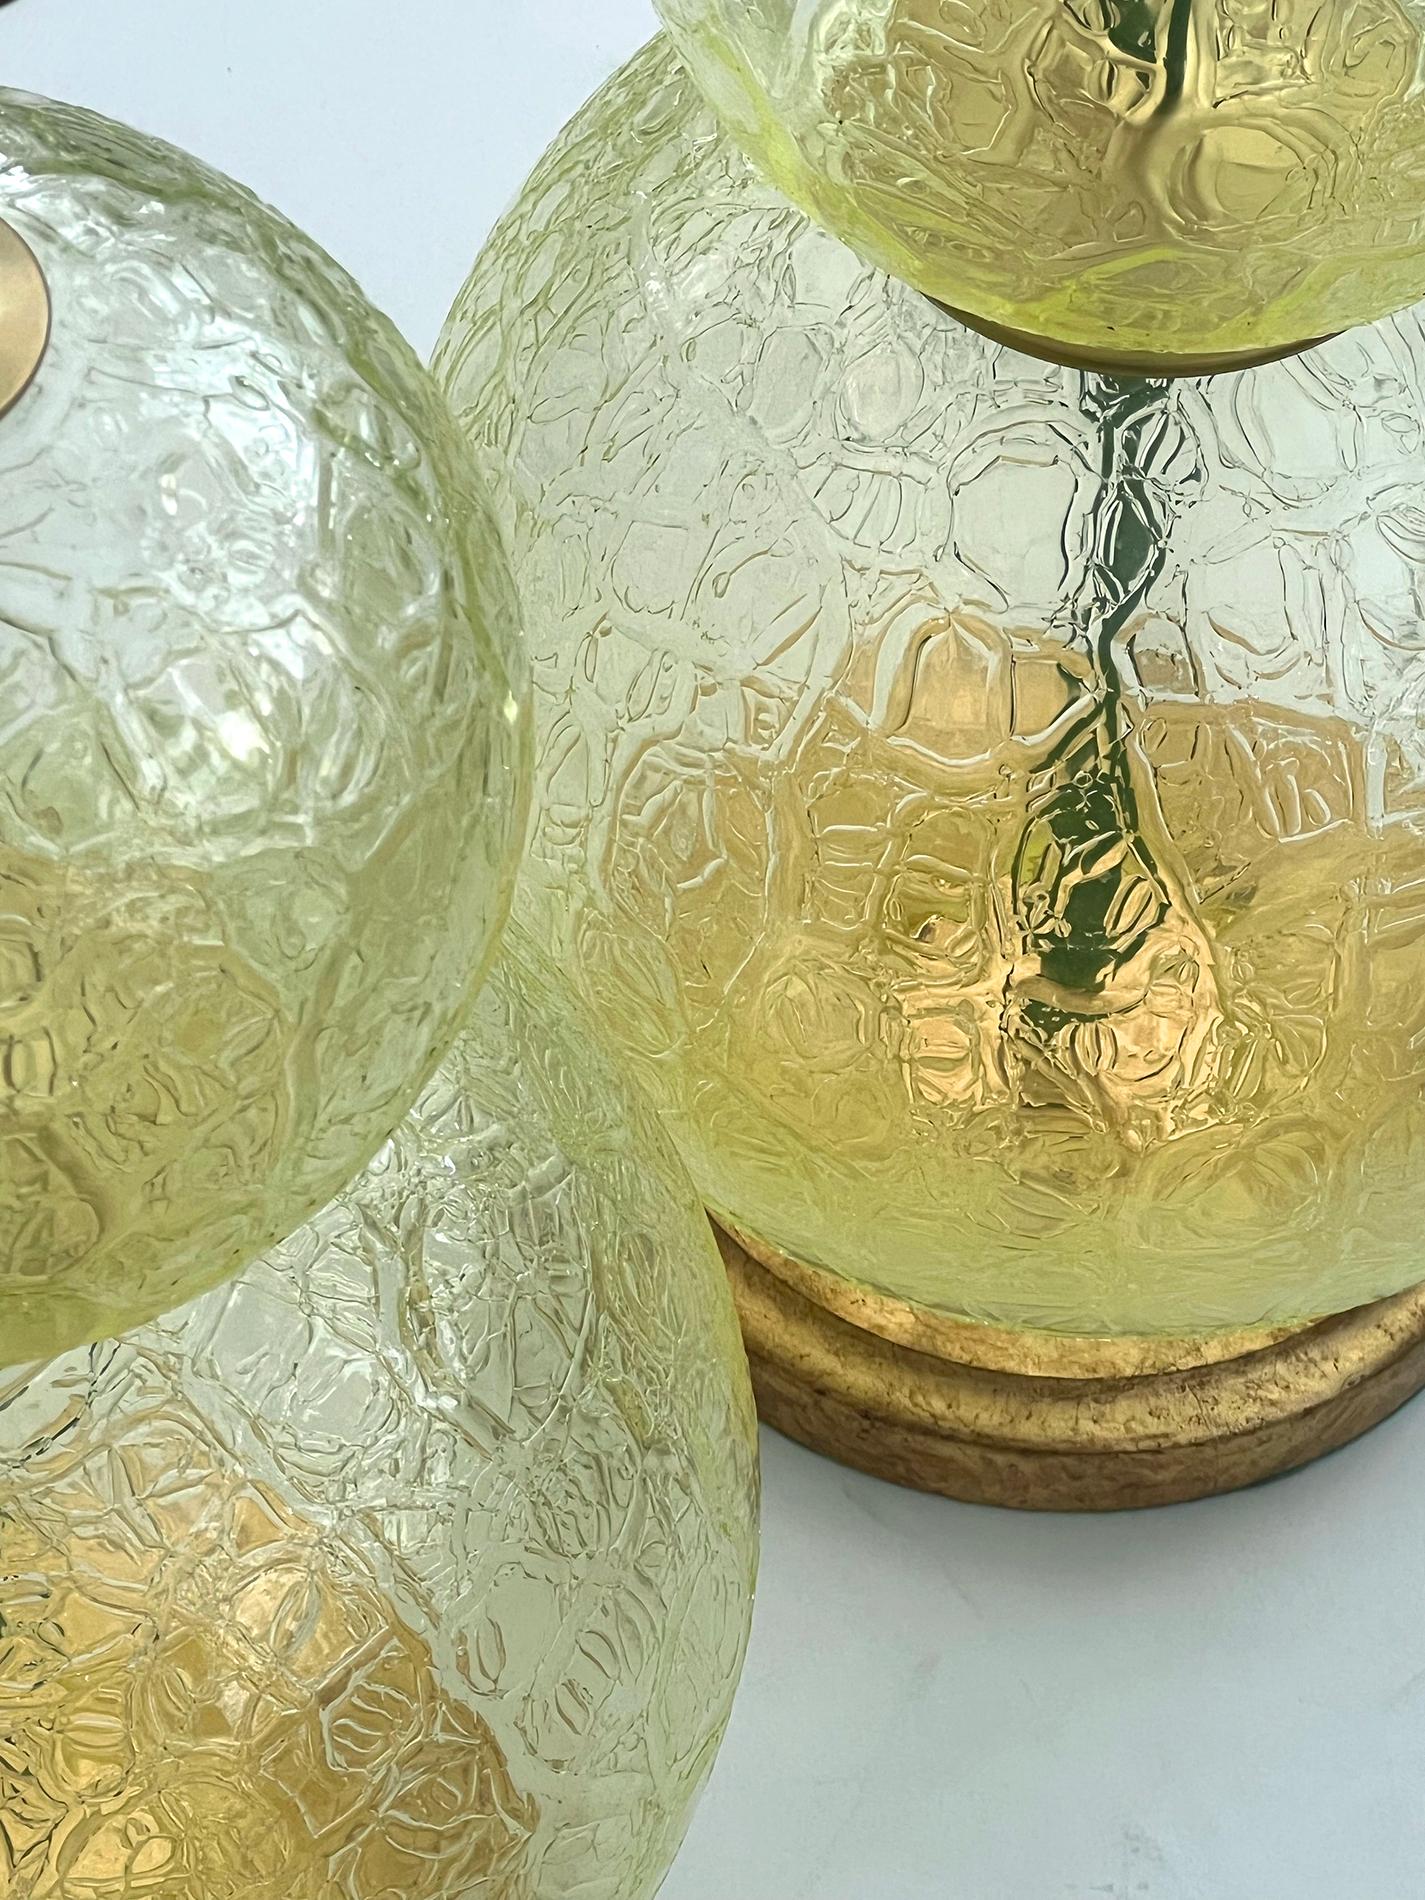 Italian A Translucent & Textured Pair of Murano Stacked Chartreuse Glass Sphere Lamps  For Sale